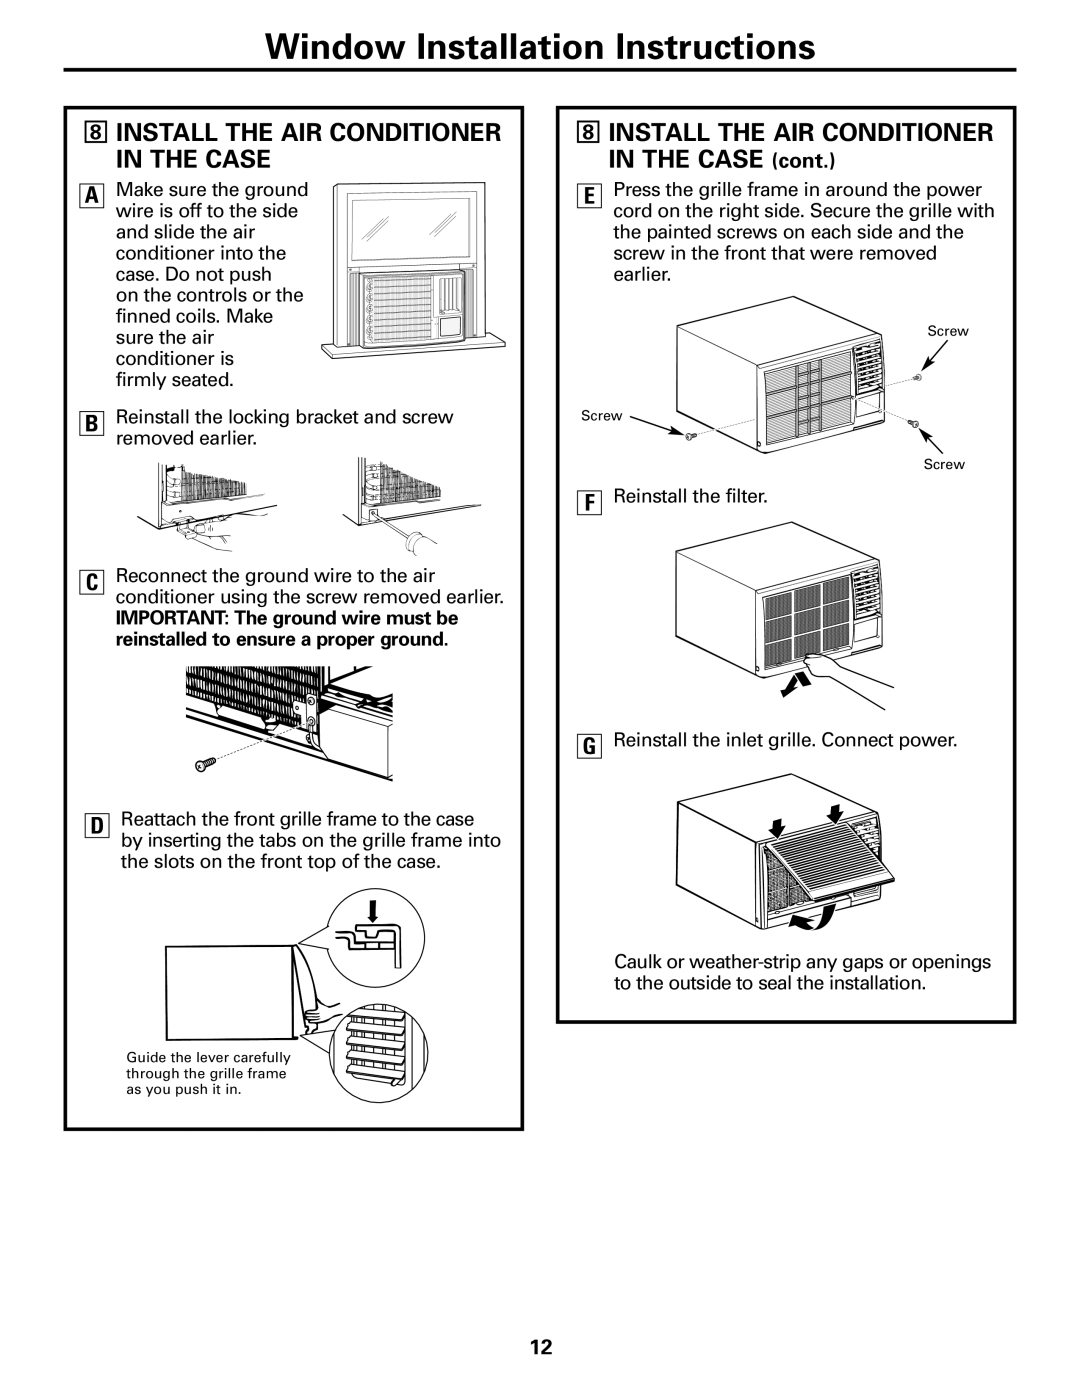 GE AEE18 owner manual 8INSTALL THE AIR CONDITIONER IN THE CASE cont, Window Installation Instructions 